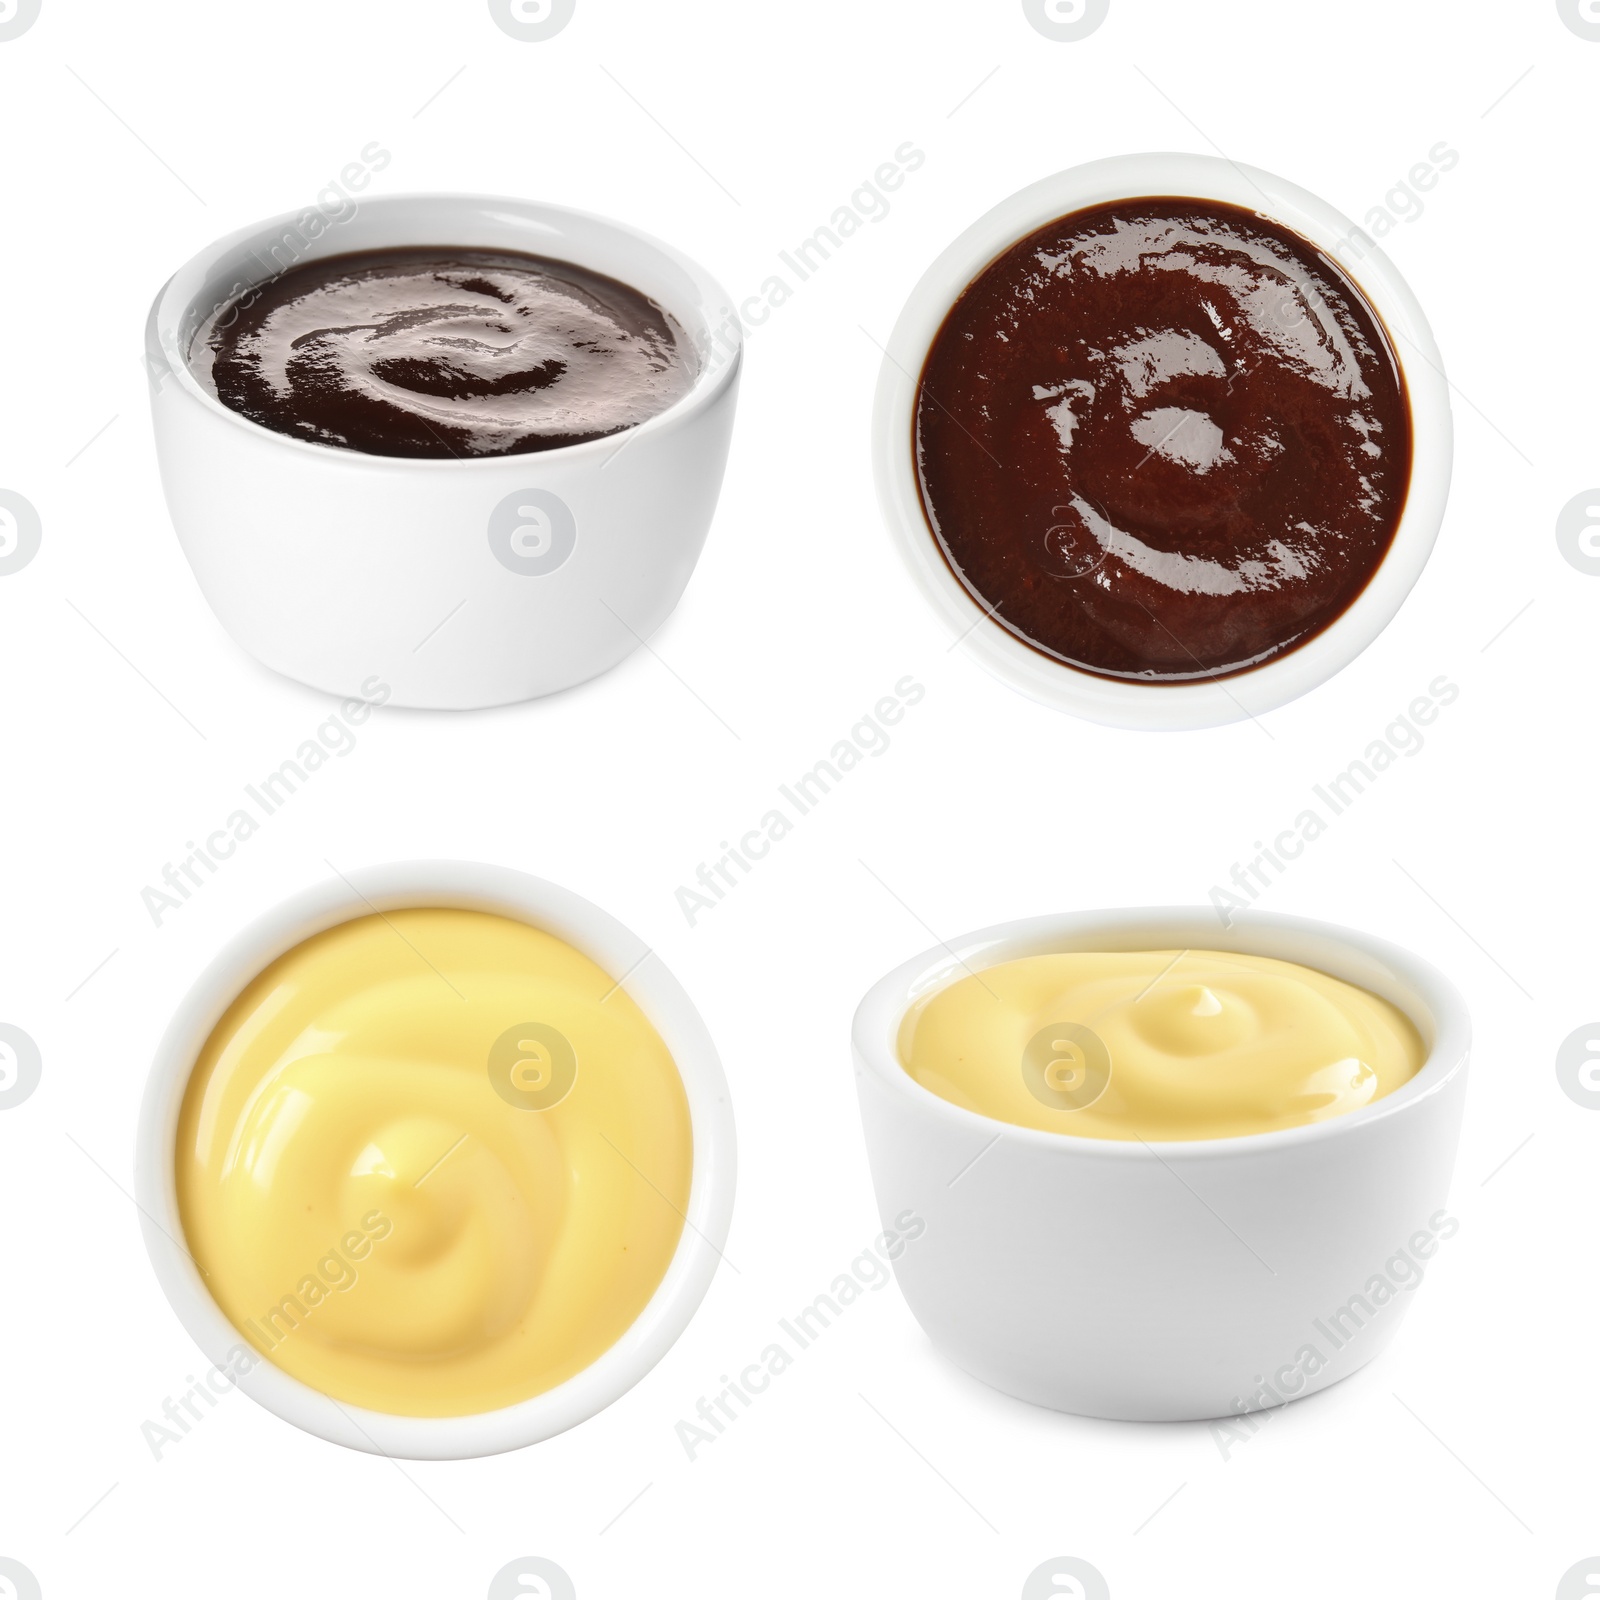 Image of Delicious tomato and cheese sauces on white background